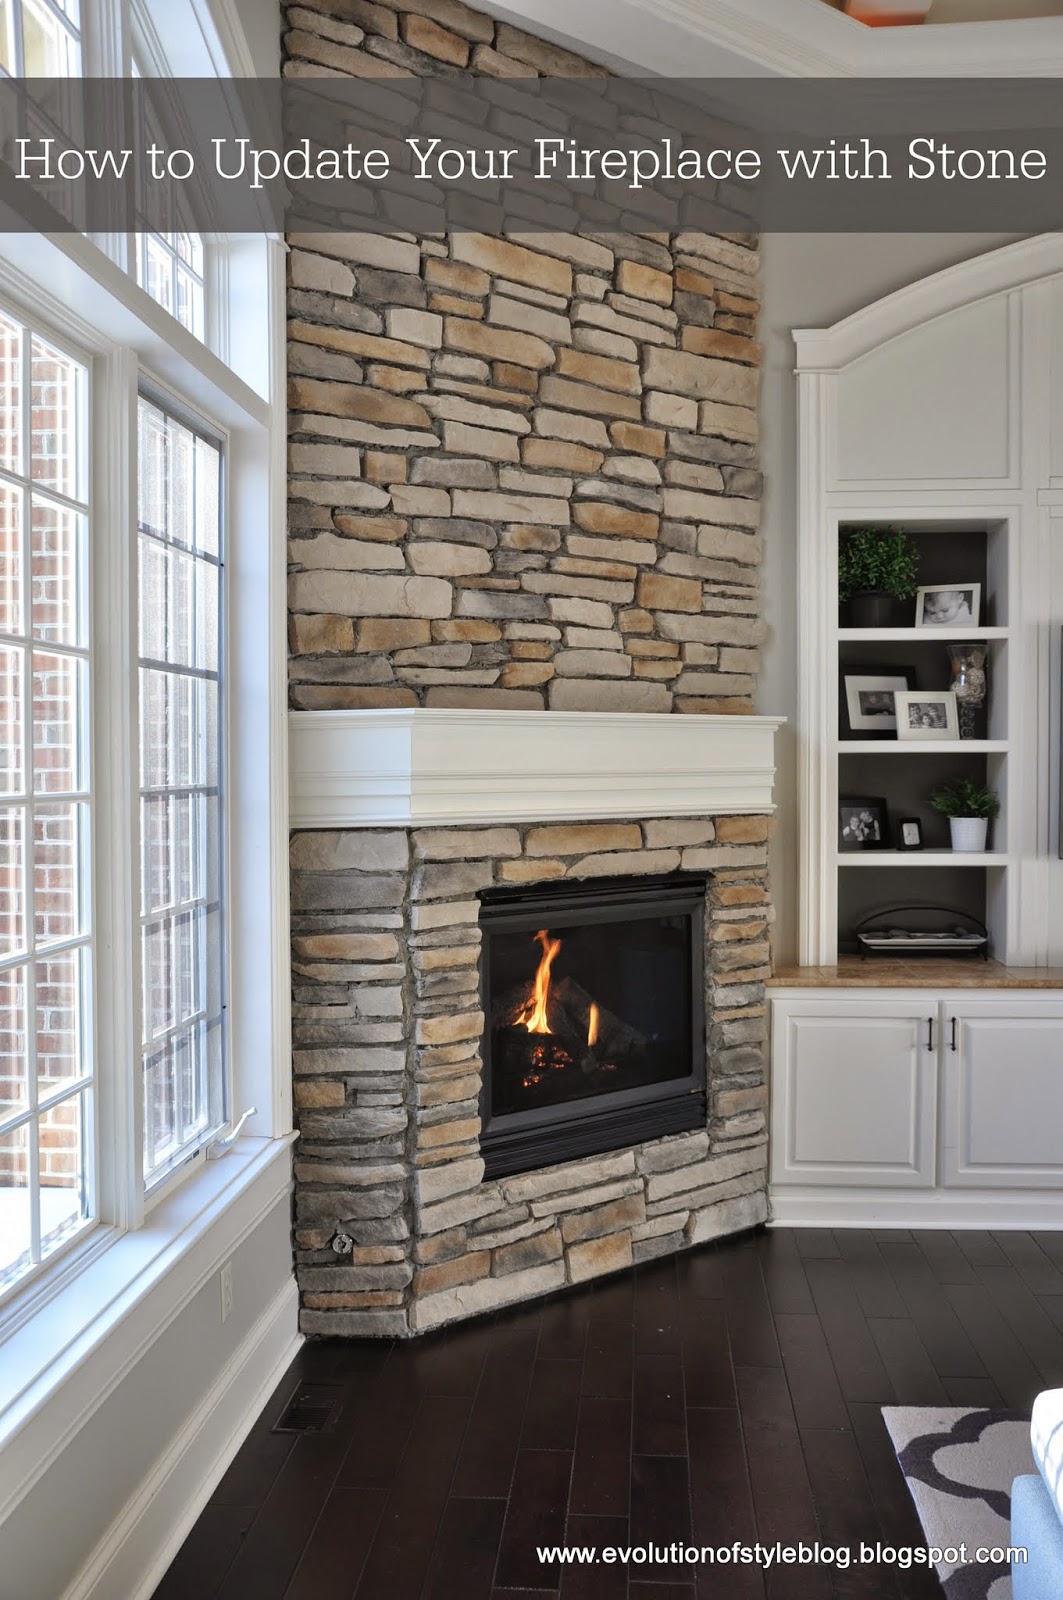 Floor to Ceiling Fireplace Remodel Ideas Luxury How to Update Your Fireplace with Stone Evolution Of Style